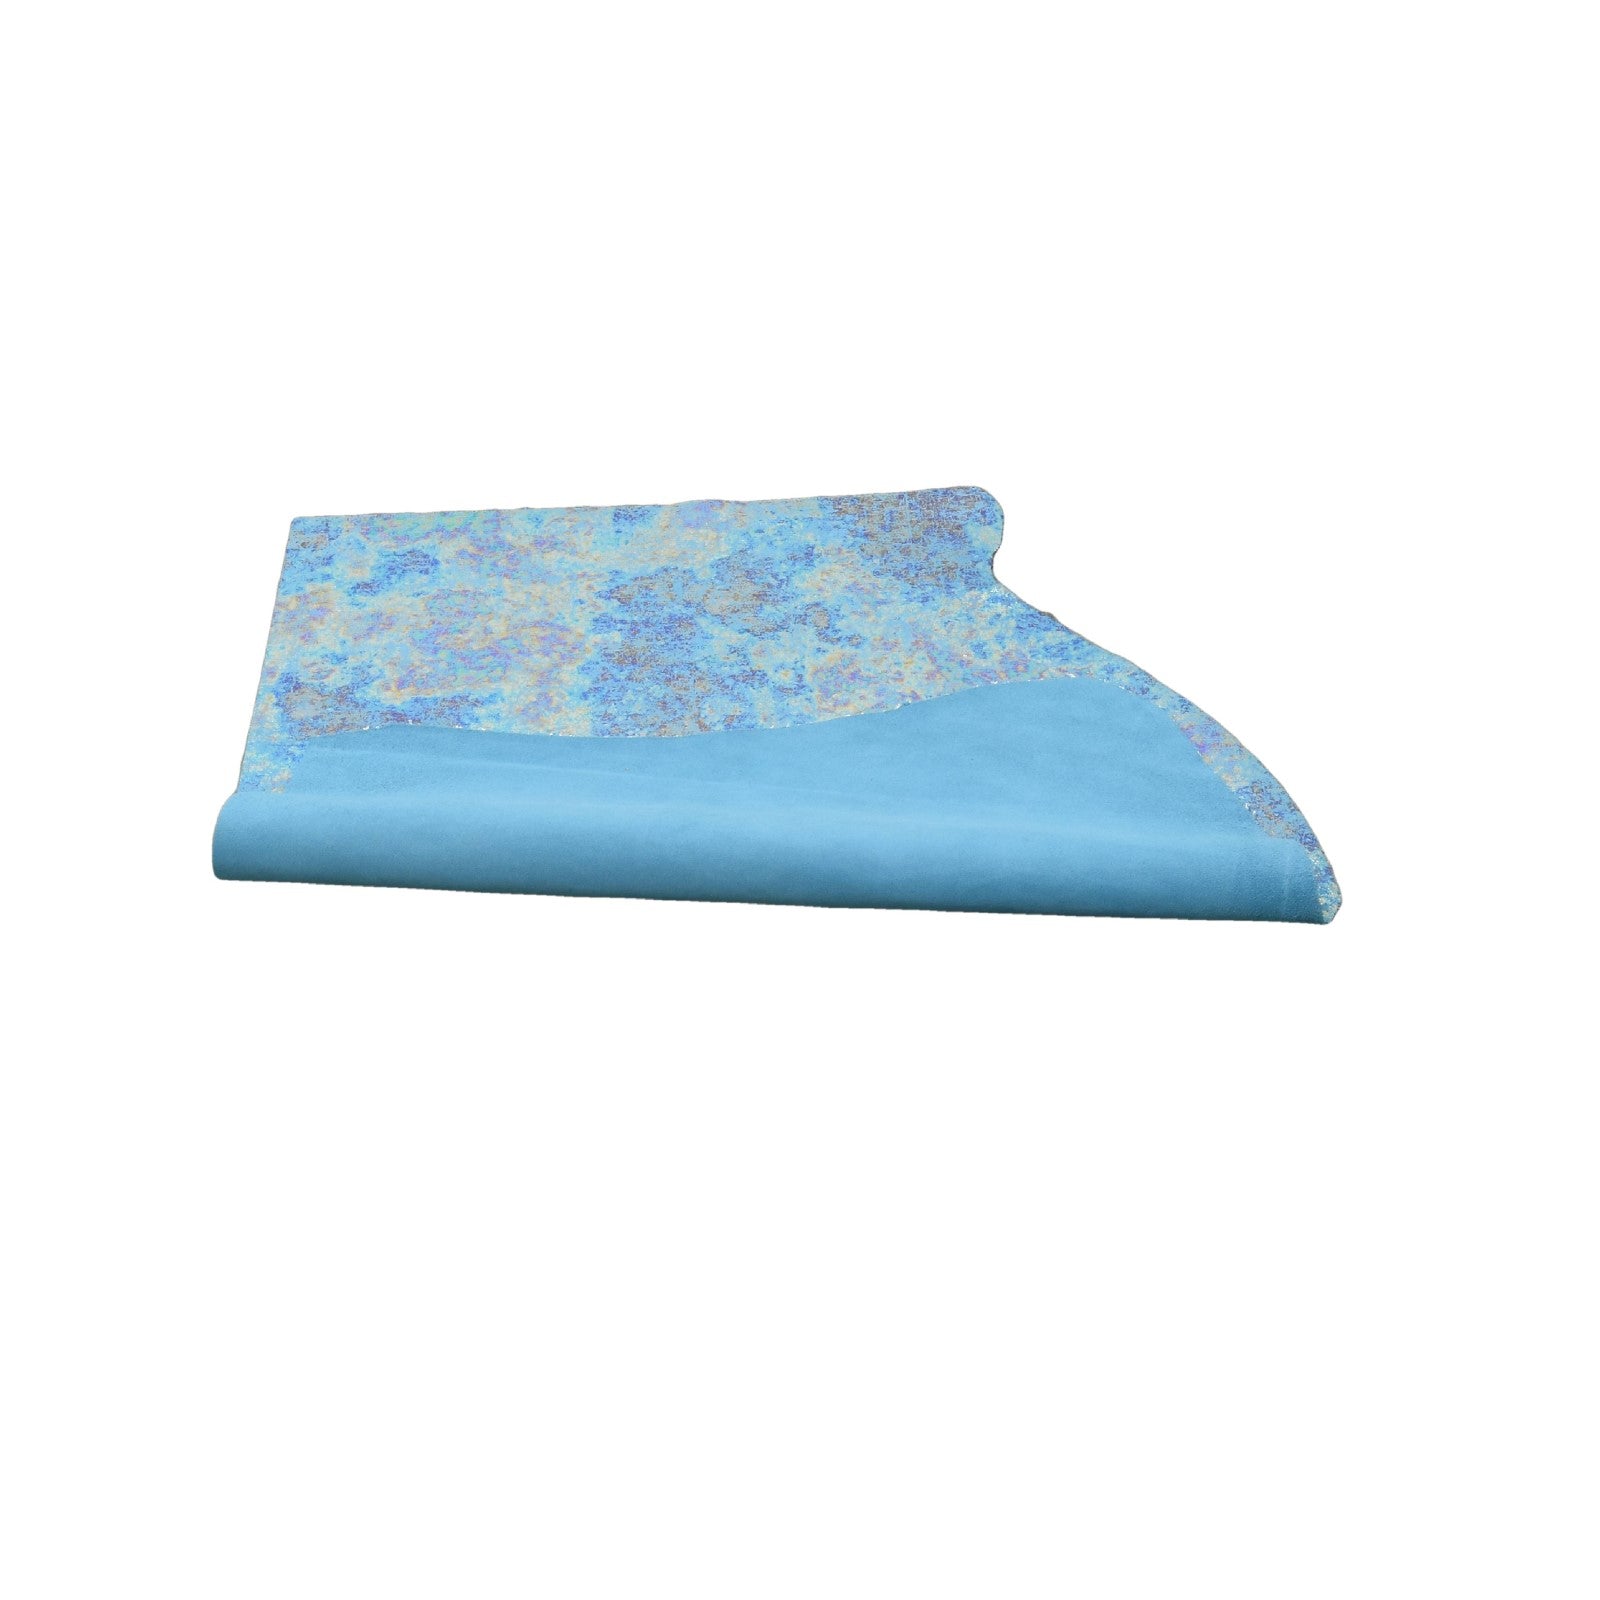 Mermaid Tears Arctic Blue 3-4 oz Cowhide Sides & Project,  | The Leather Guy